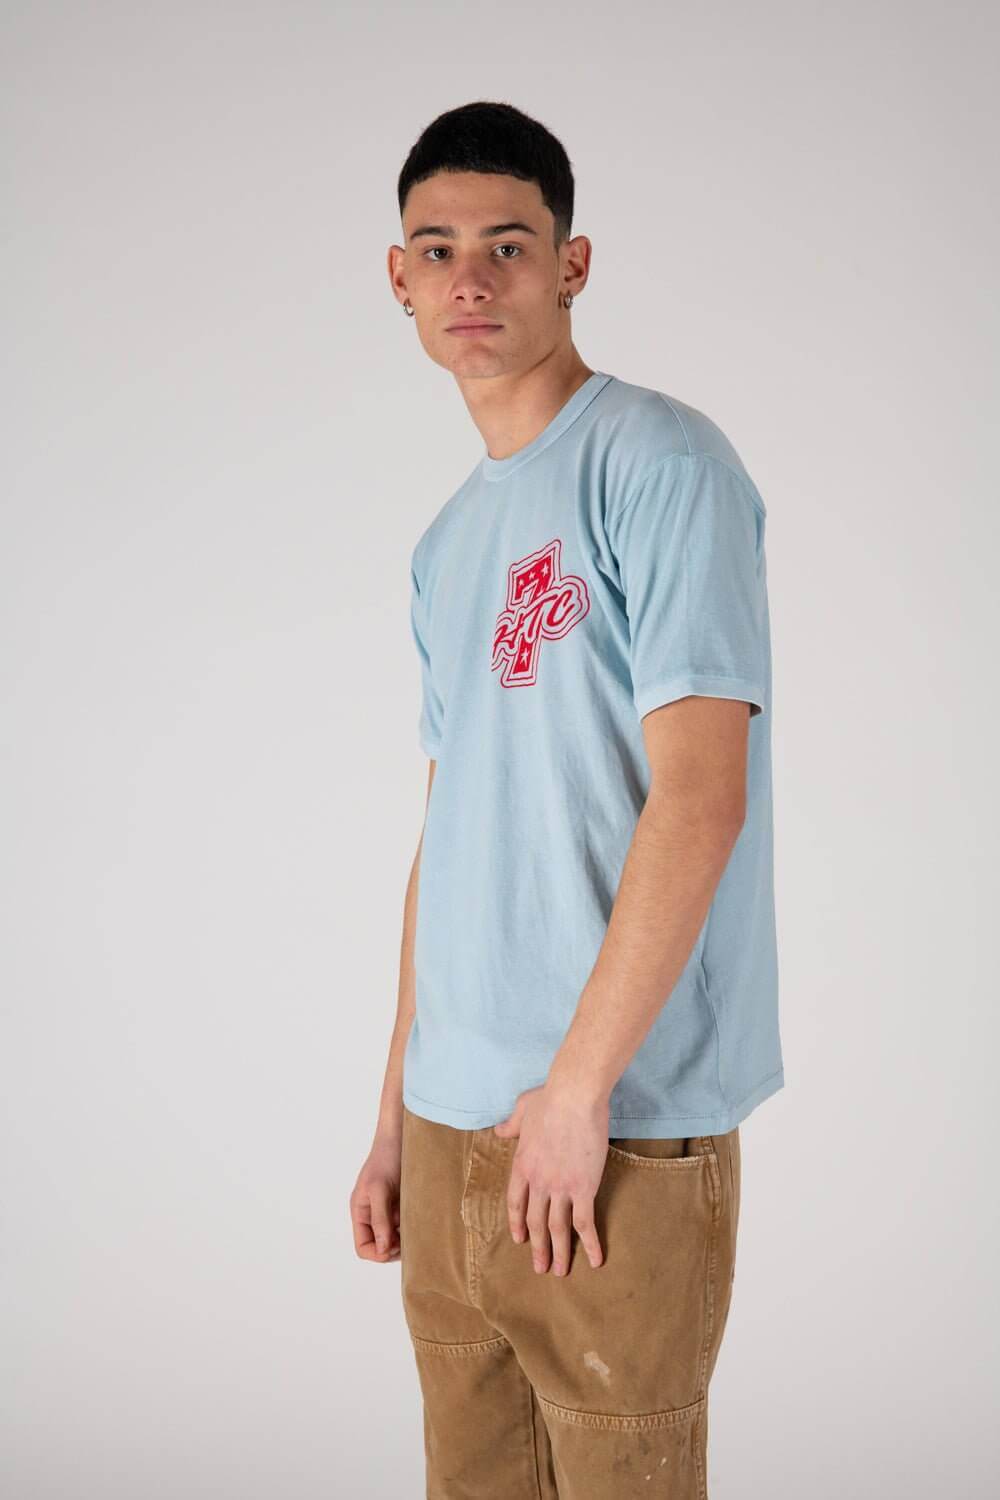 ARMLESS - AKA7 Regular fit t-shirt with printed 7 logo on the front. Composition: 100% Cotton HTC LOS ANGELES